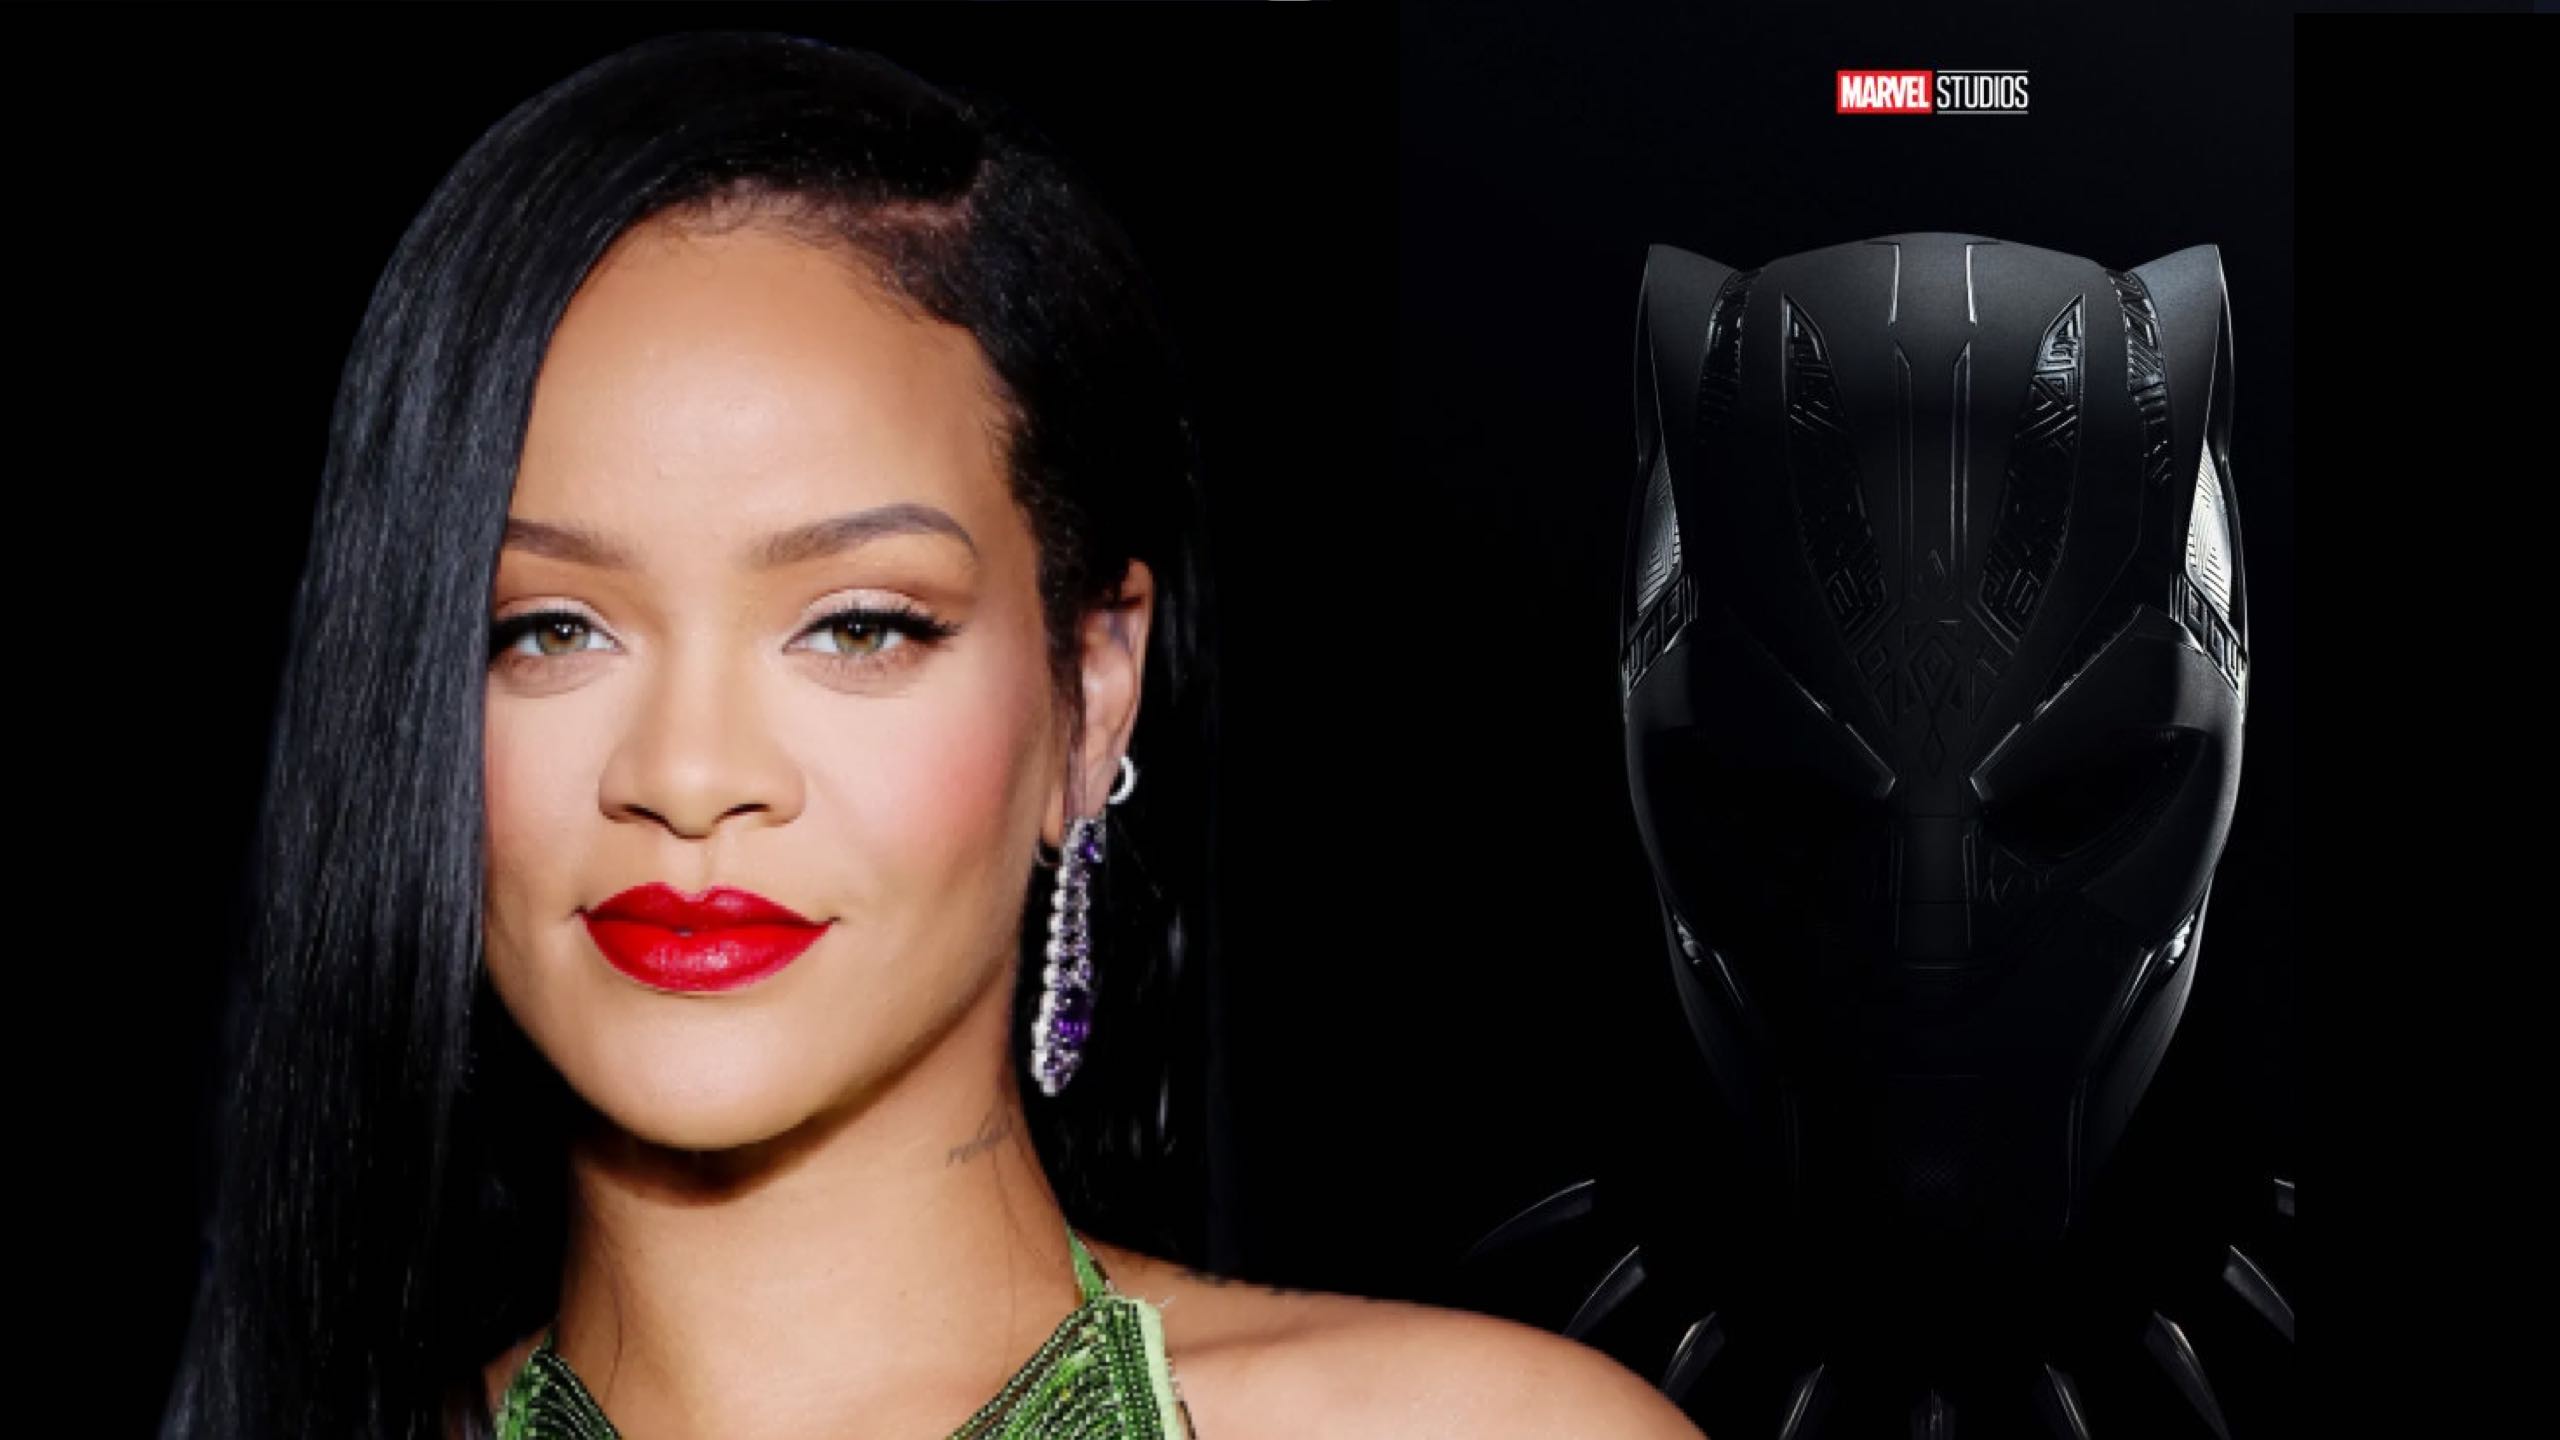 Marvel Studios Seemingly Confirms Rihanna’s Involvement With ‘Black Panther 2’ Soundtrack, First Single Coming Out Friday